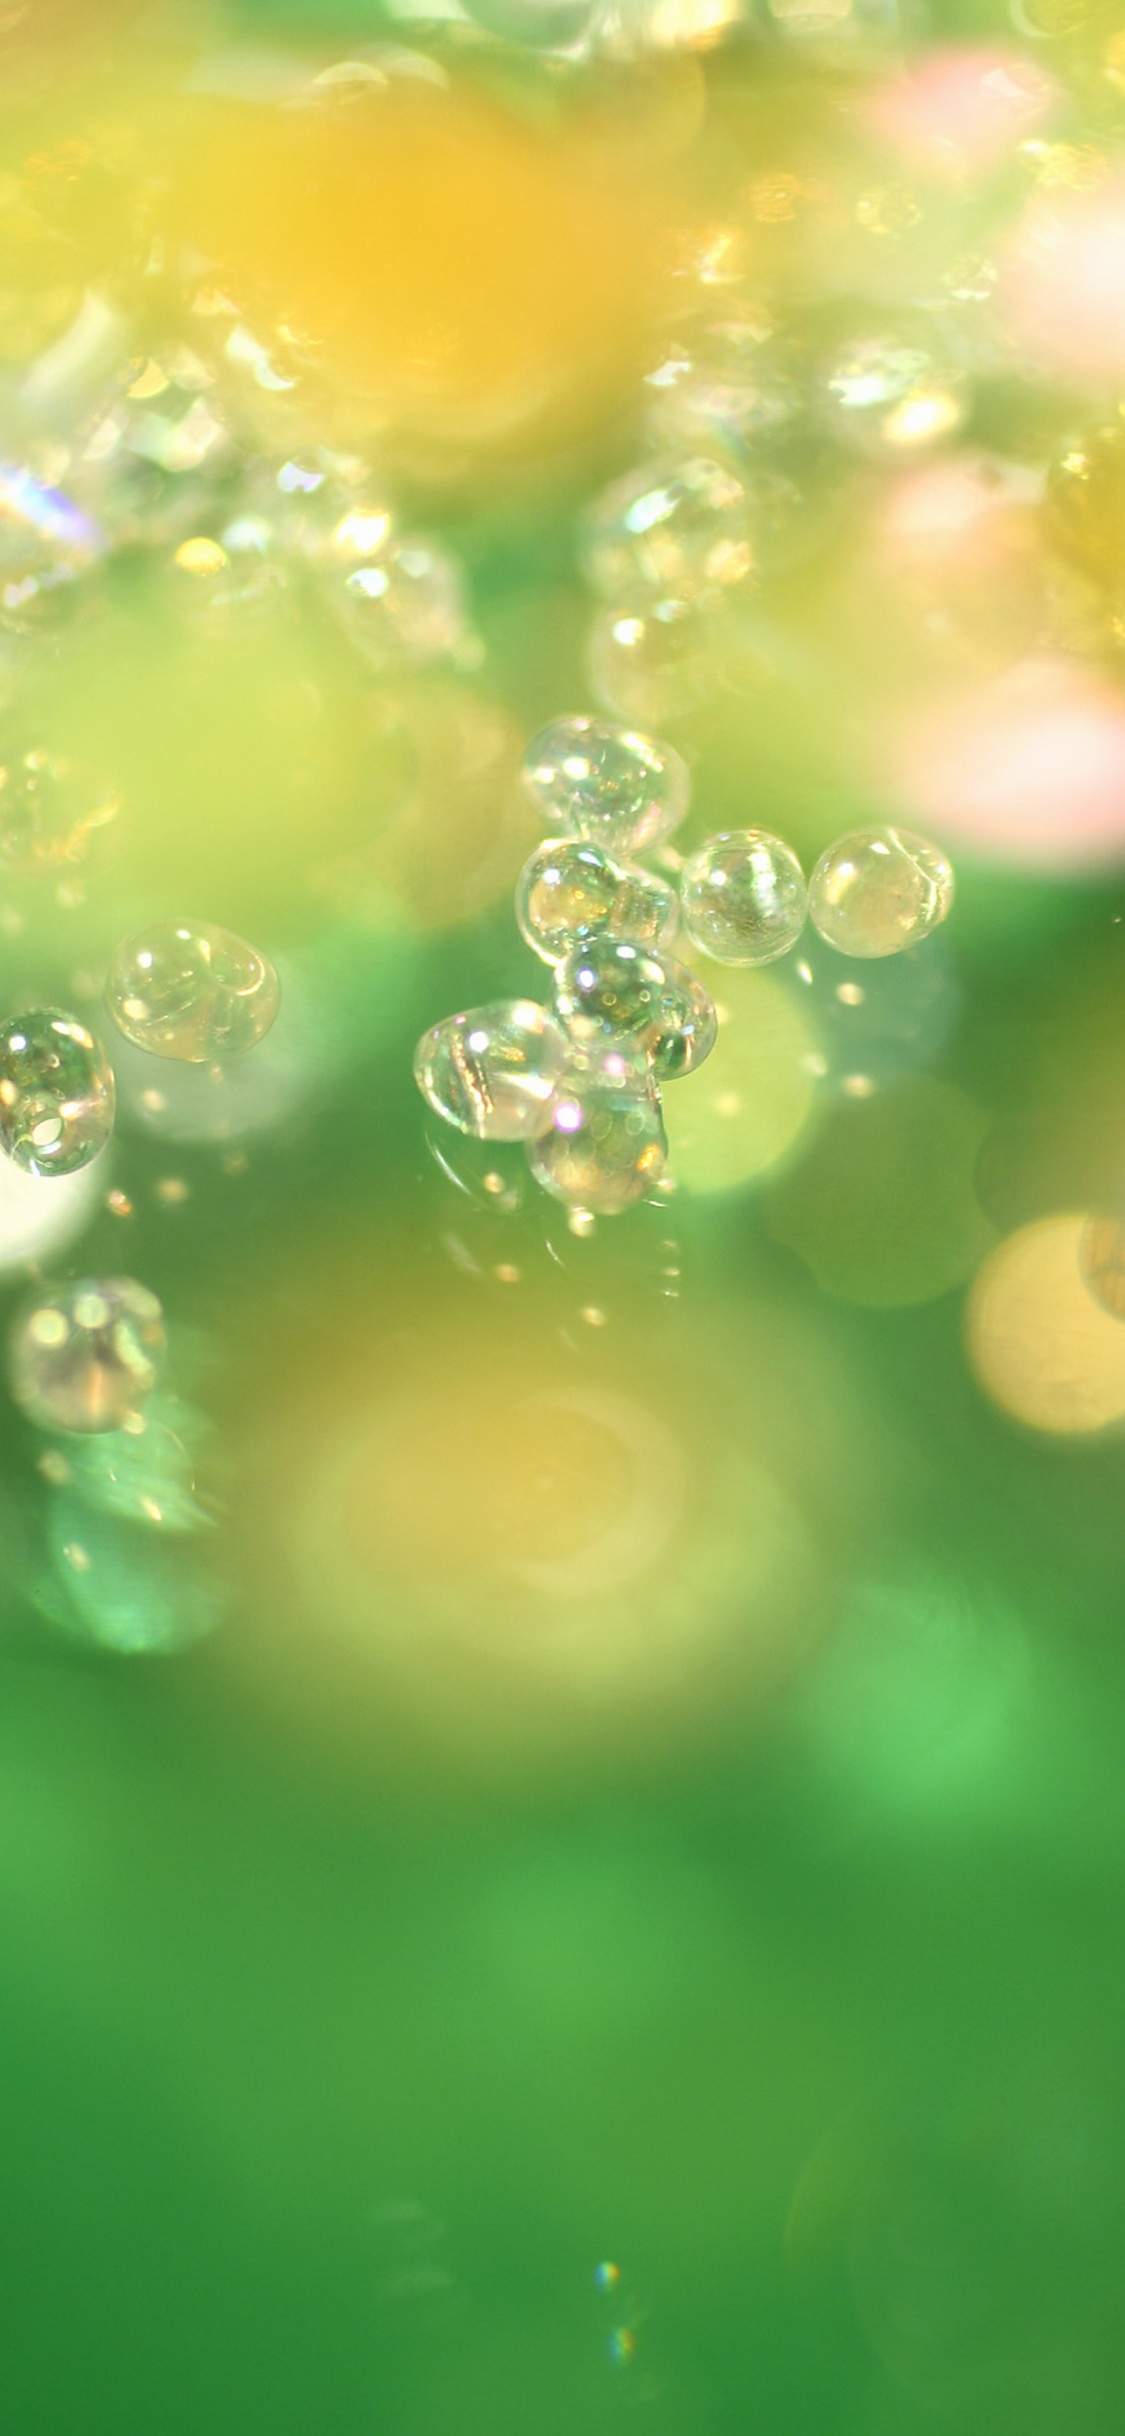 Water Droplets on Green Surface. Wallpaper in 1125x2436 Resolution